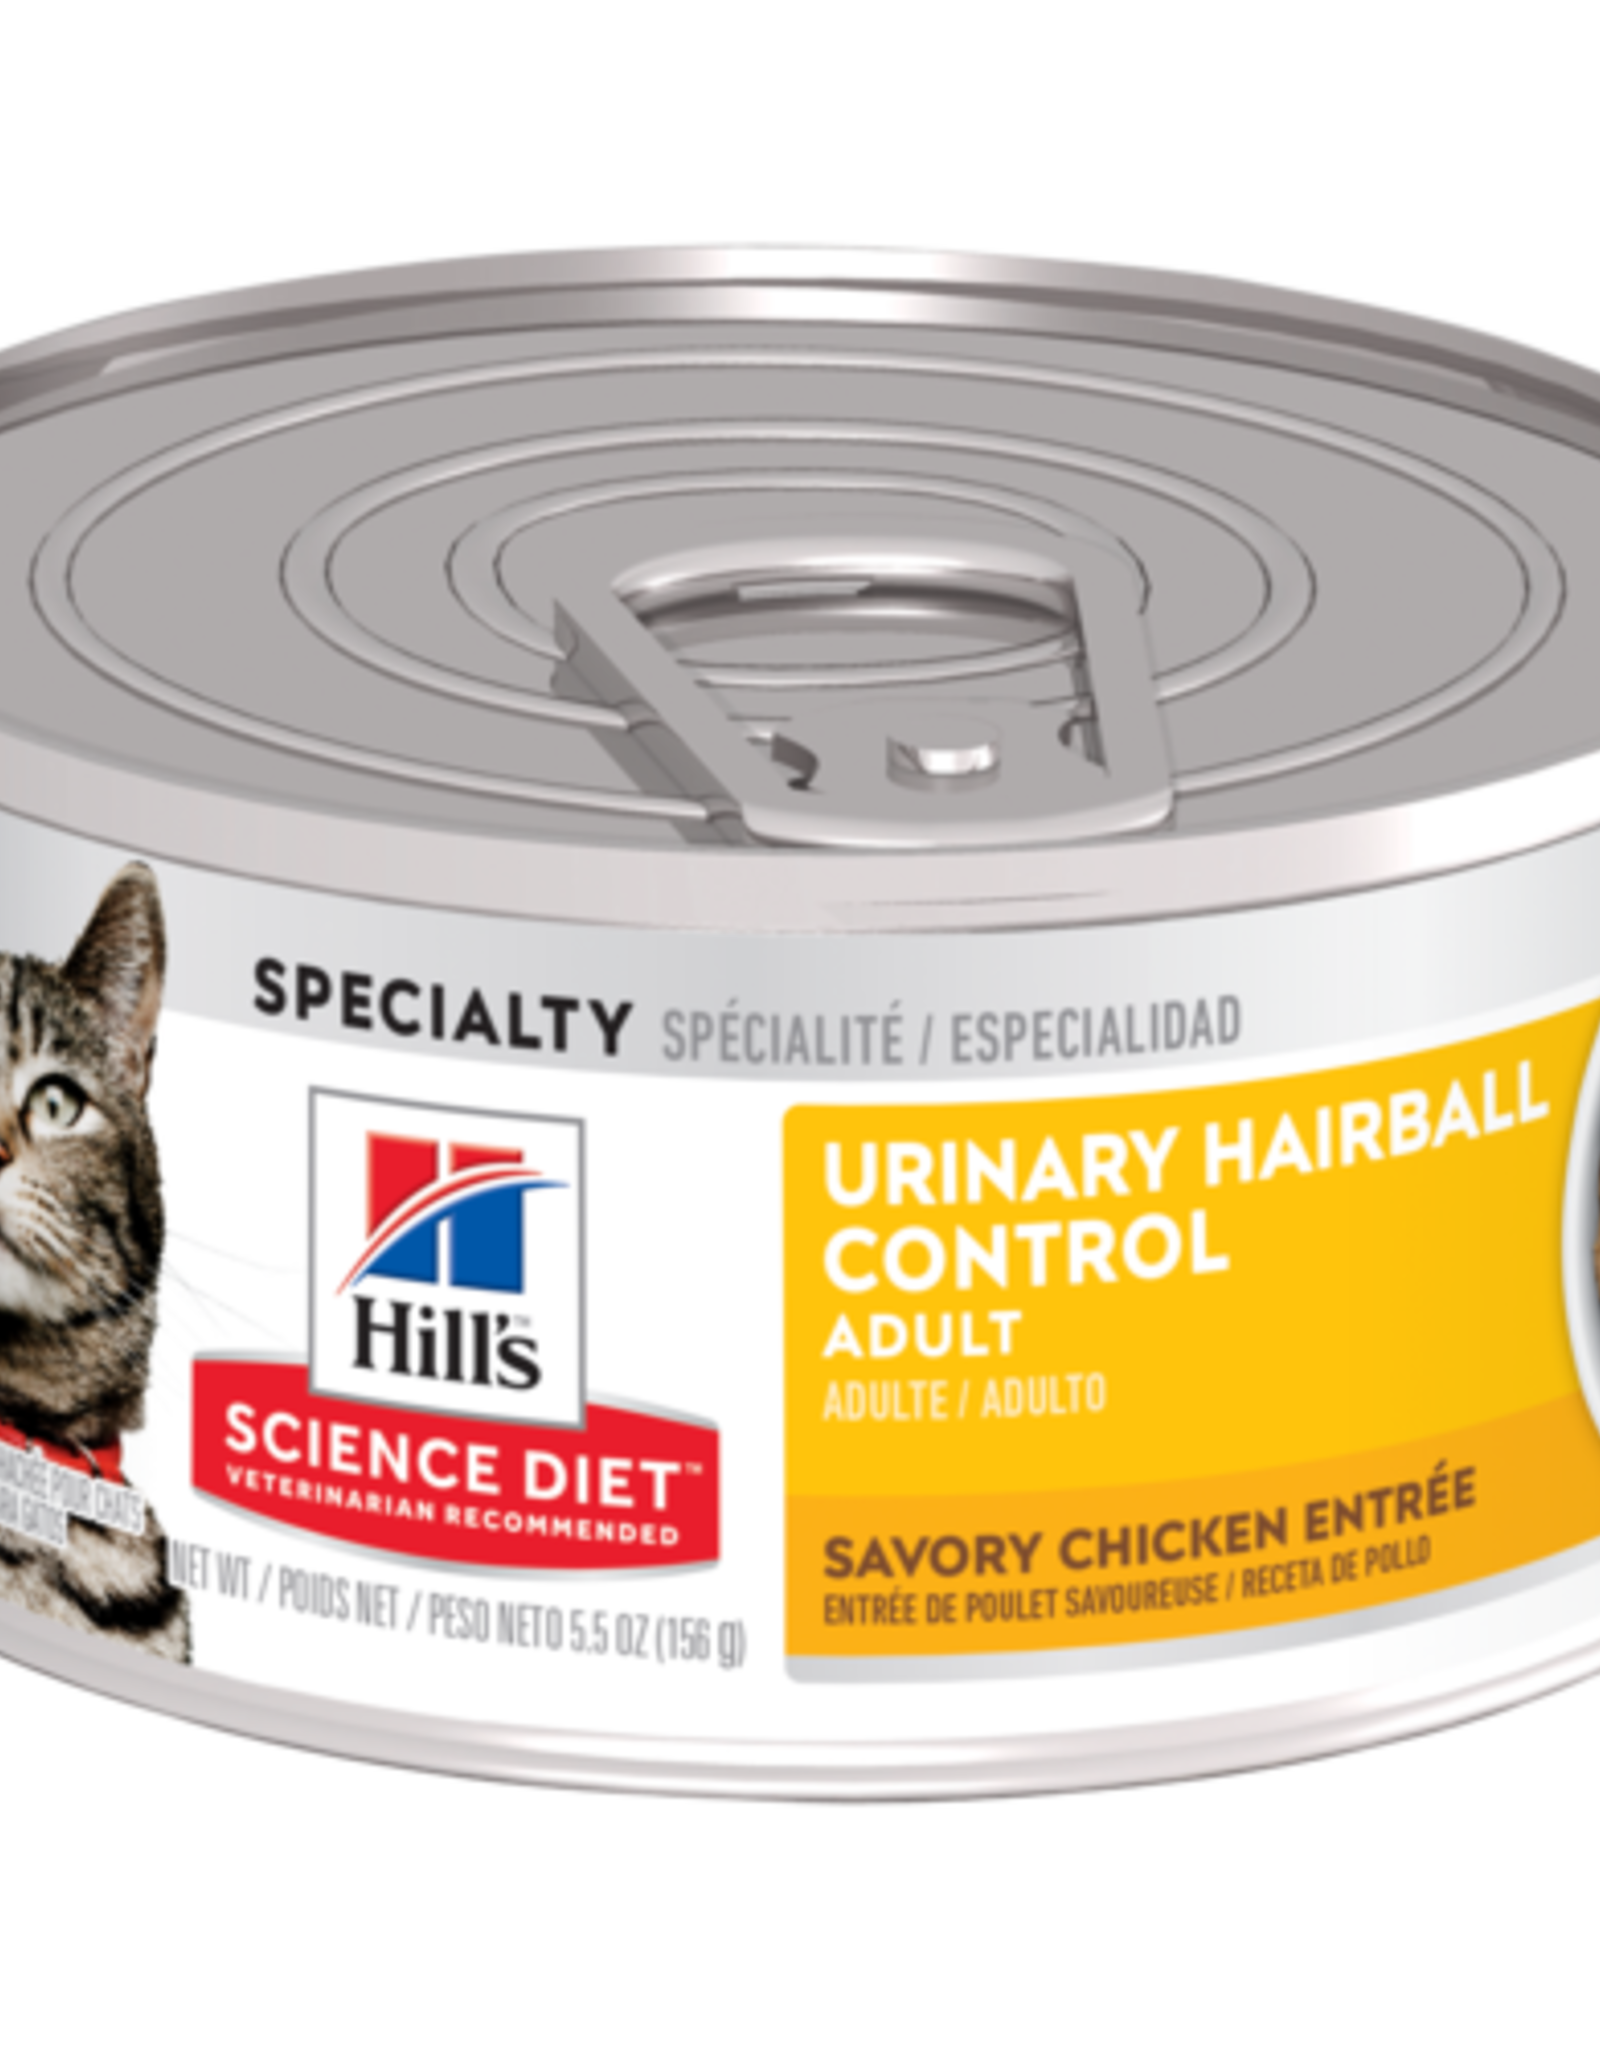 SCIENCE DIET HILL'S SCIENCE DIET FELINE CAN ADULT SAVORY CHICKEN URINARY HAIRBALL CONTROL 5.5OZ CASE OF 24